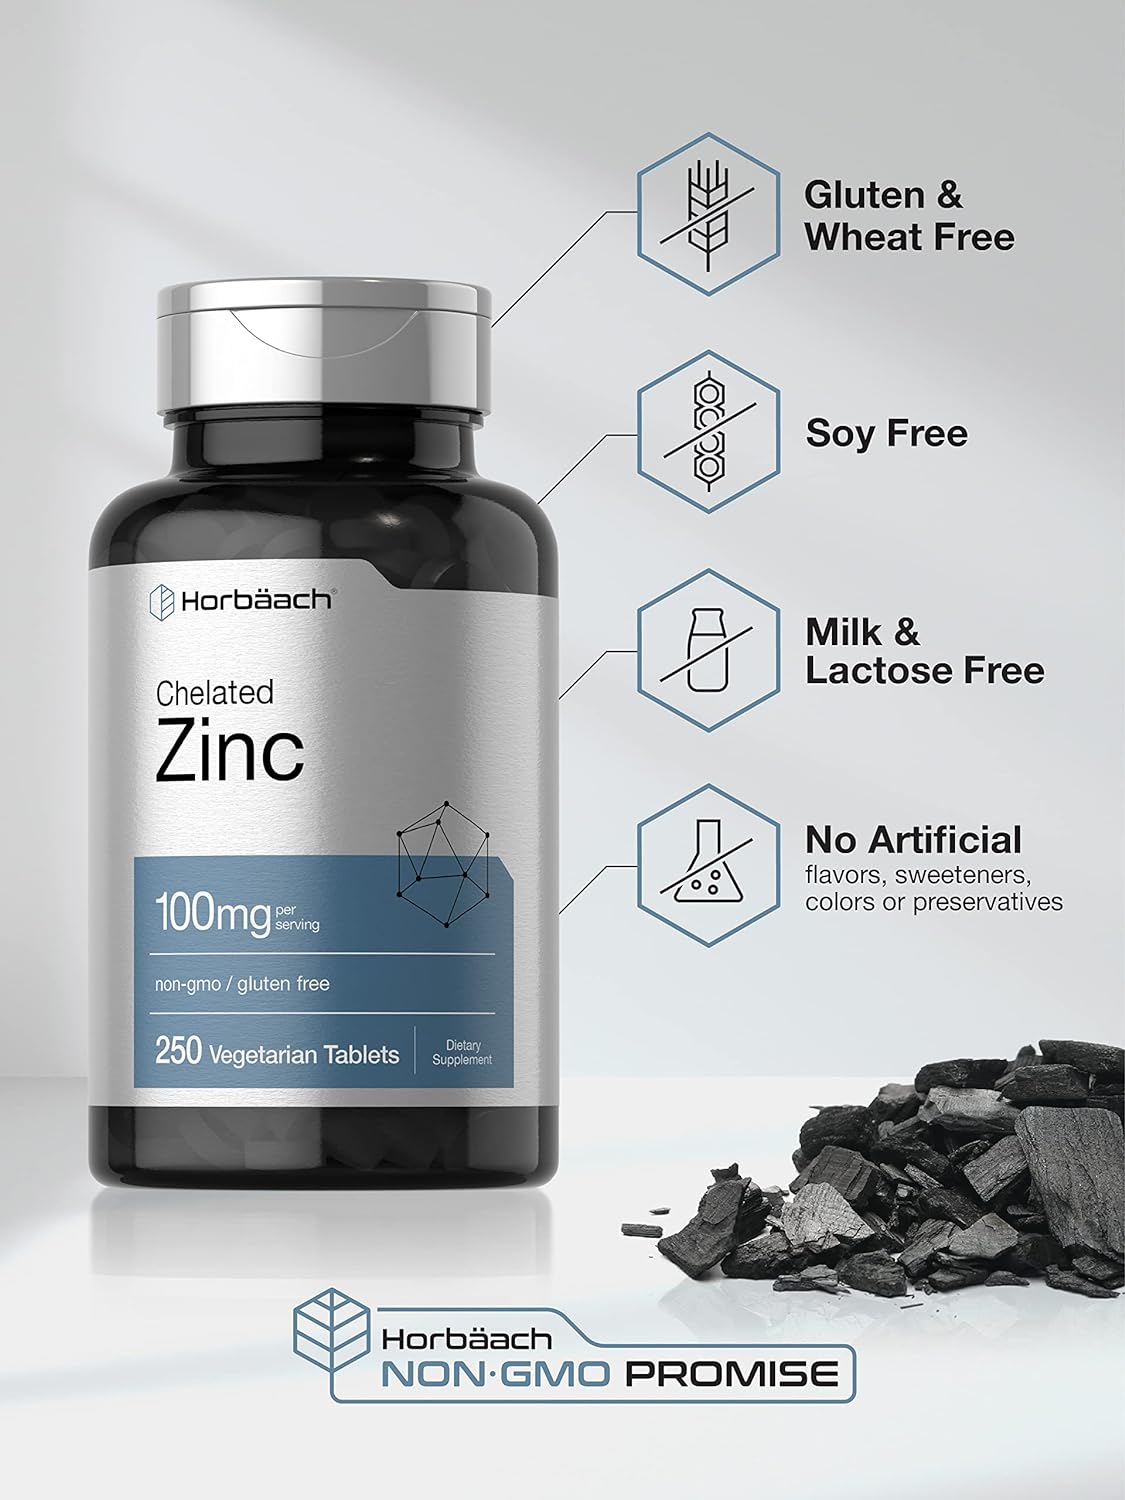 Chelated Zinc Supplement 100mg | 250 Tablets | High Potency & Superior